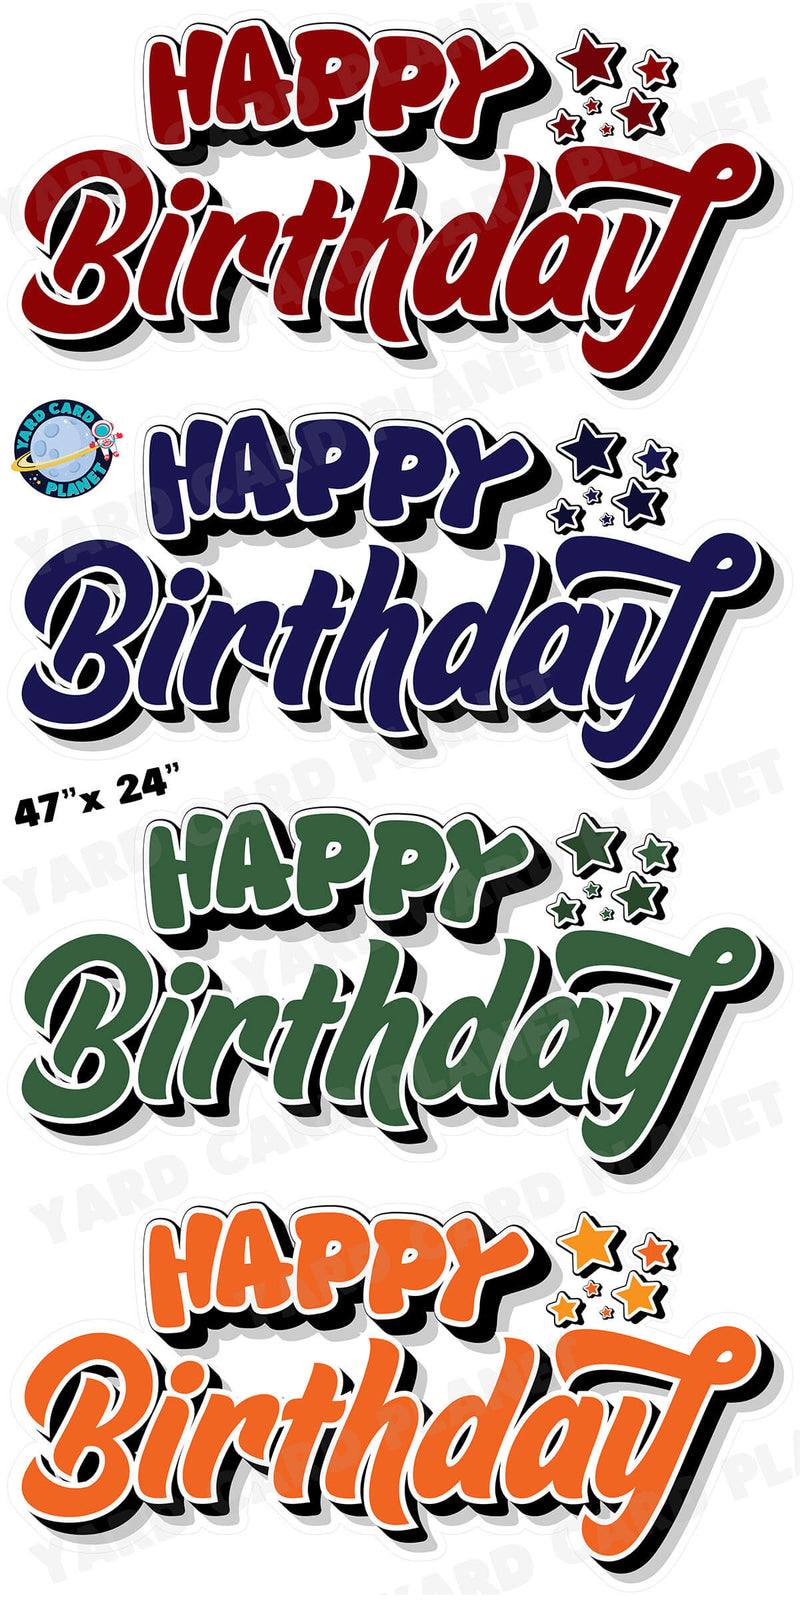 Happy Birthday EZ Quick Signs in Solid Maroon, Navy Blue, Hunter Green and Orange Yard Card Set with Measurements